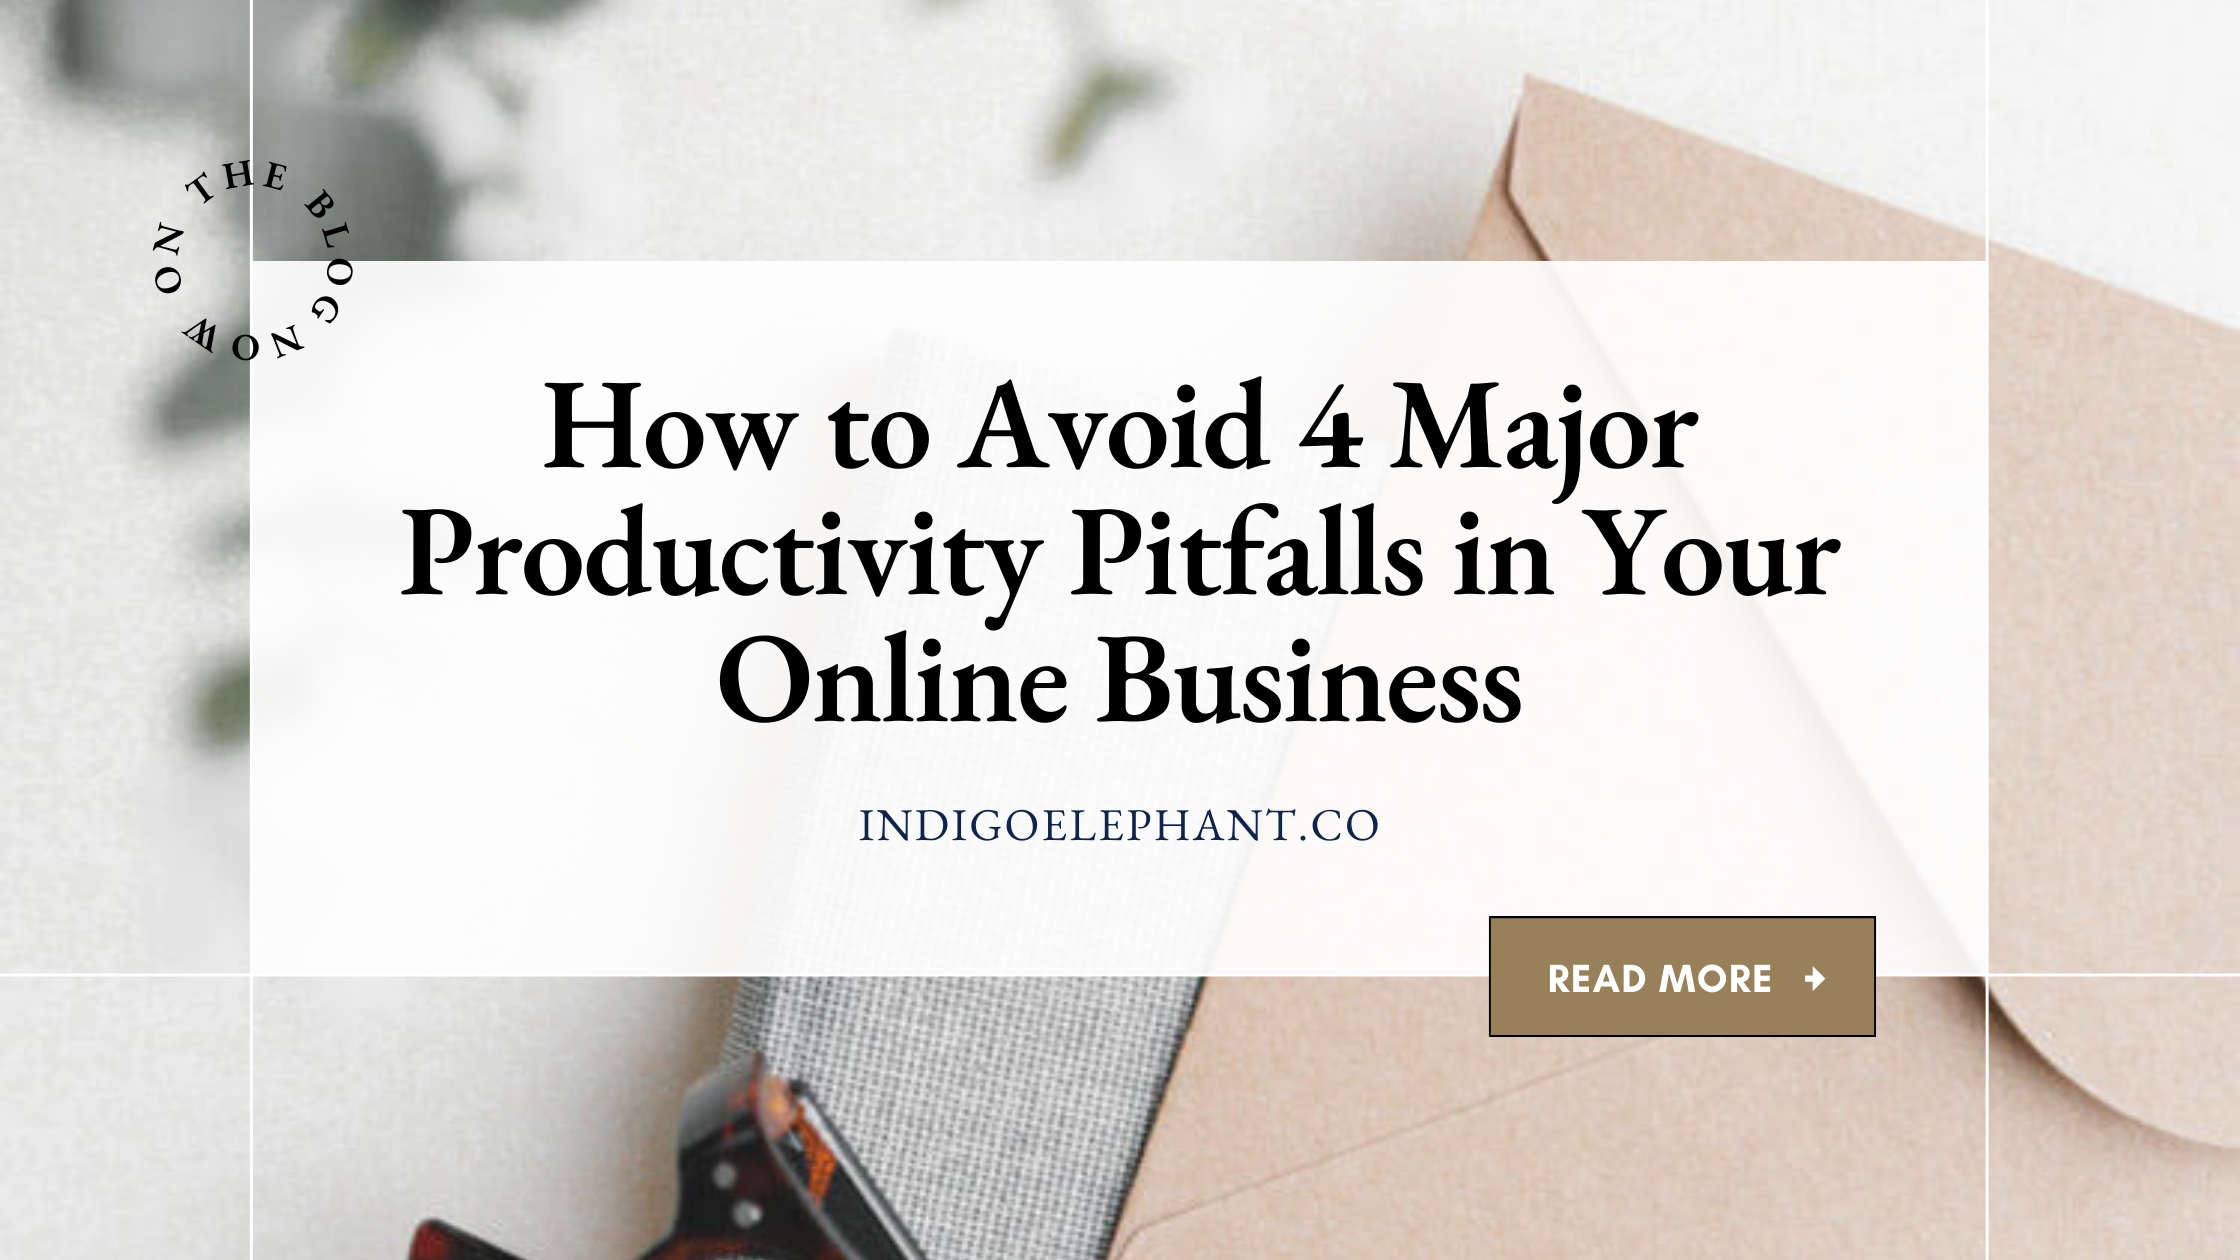 How to Avoid 4 Major Productivity Pitfalls in Your Online Business